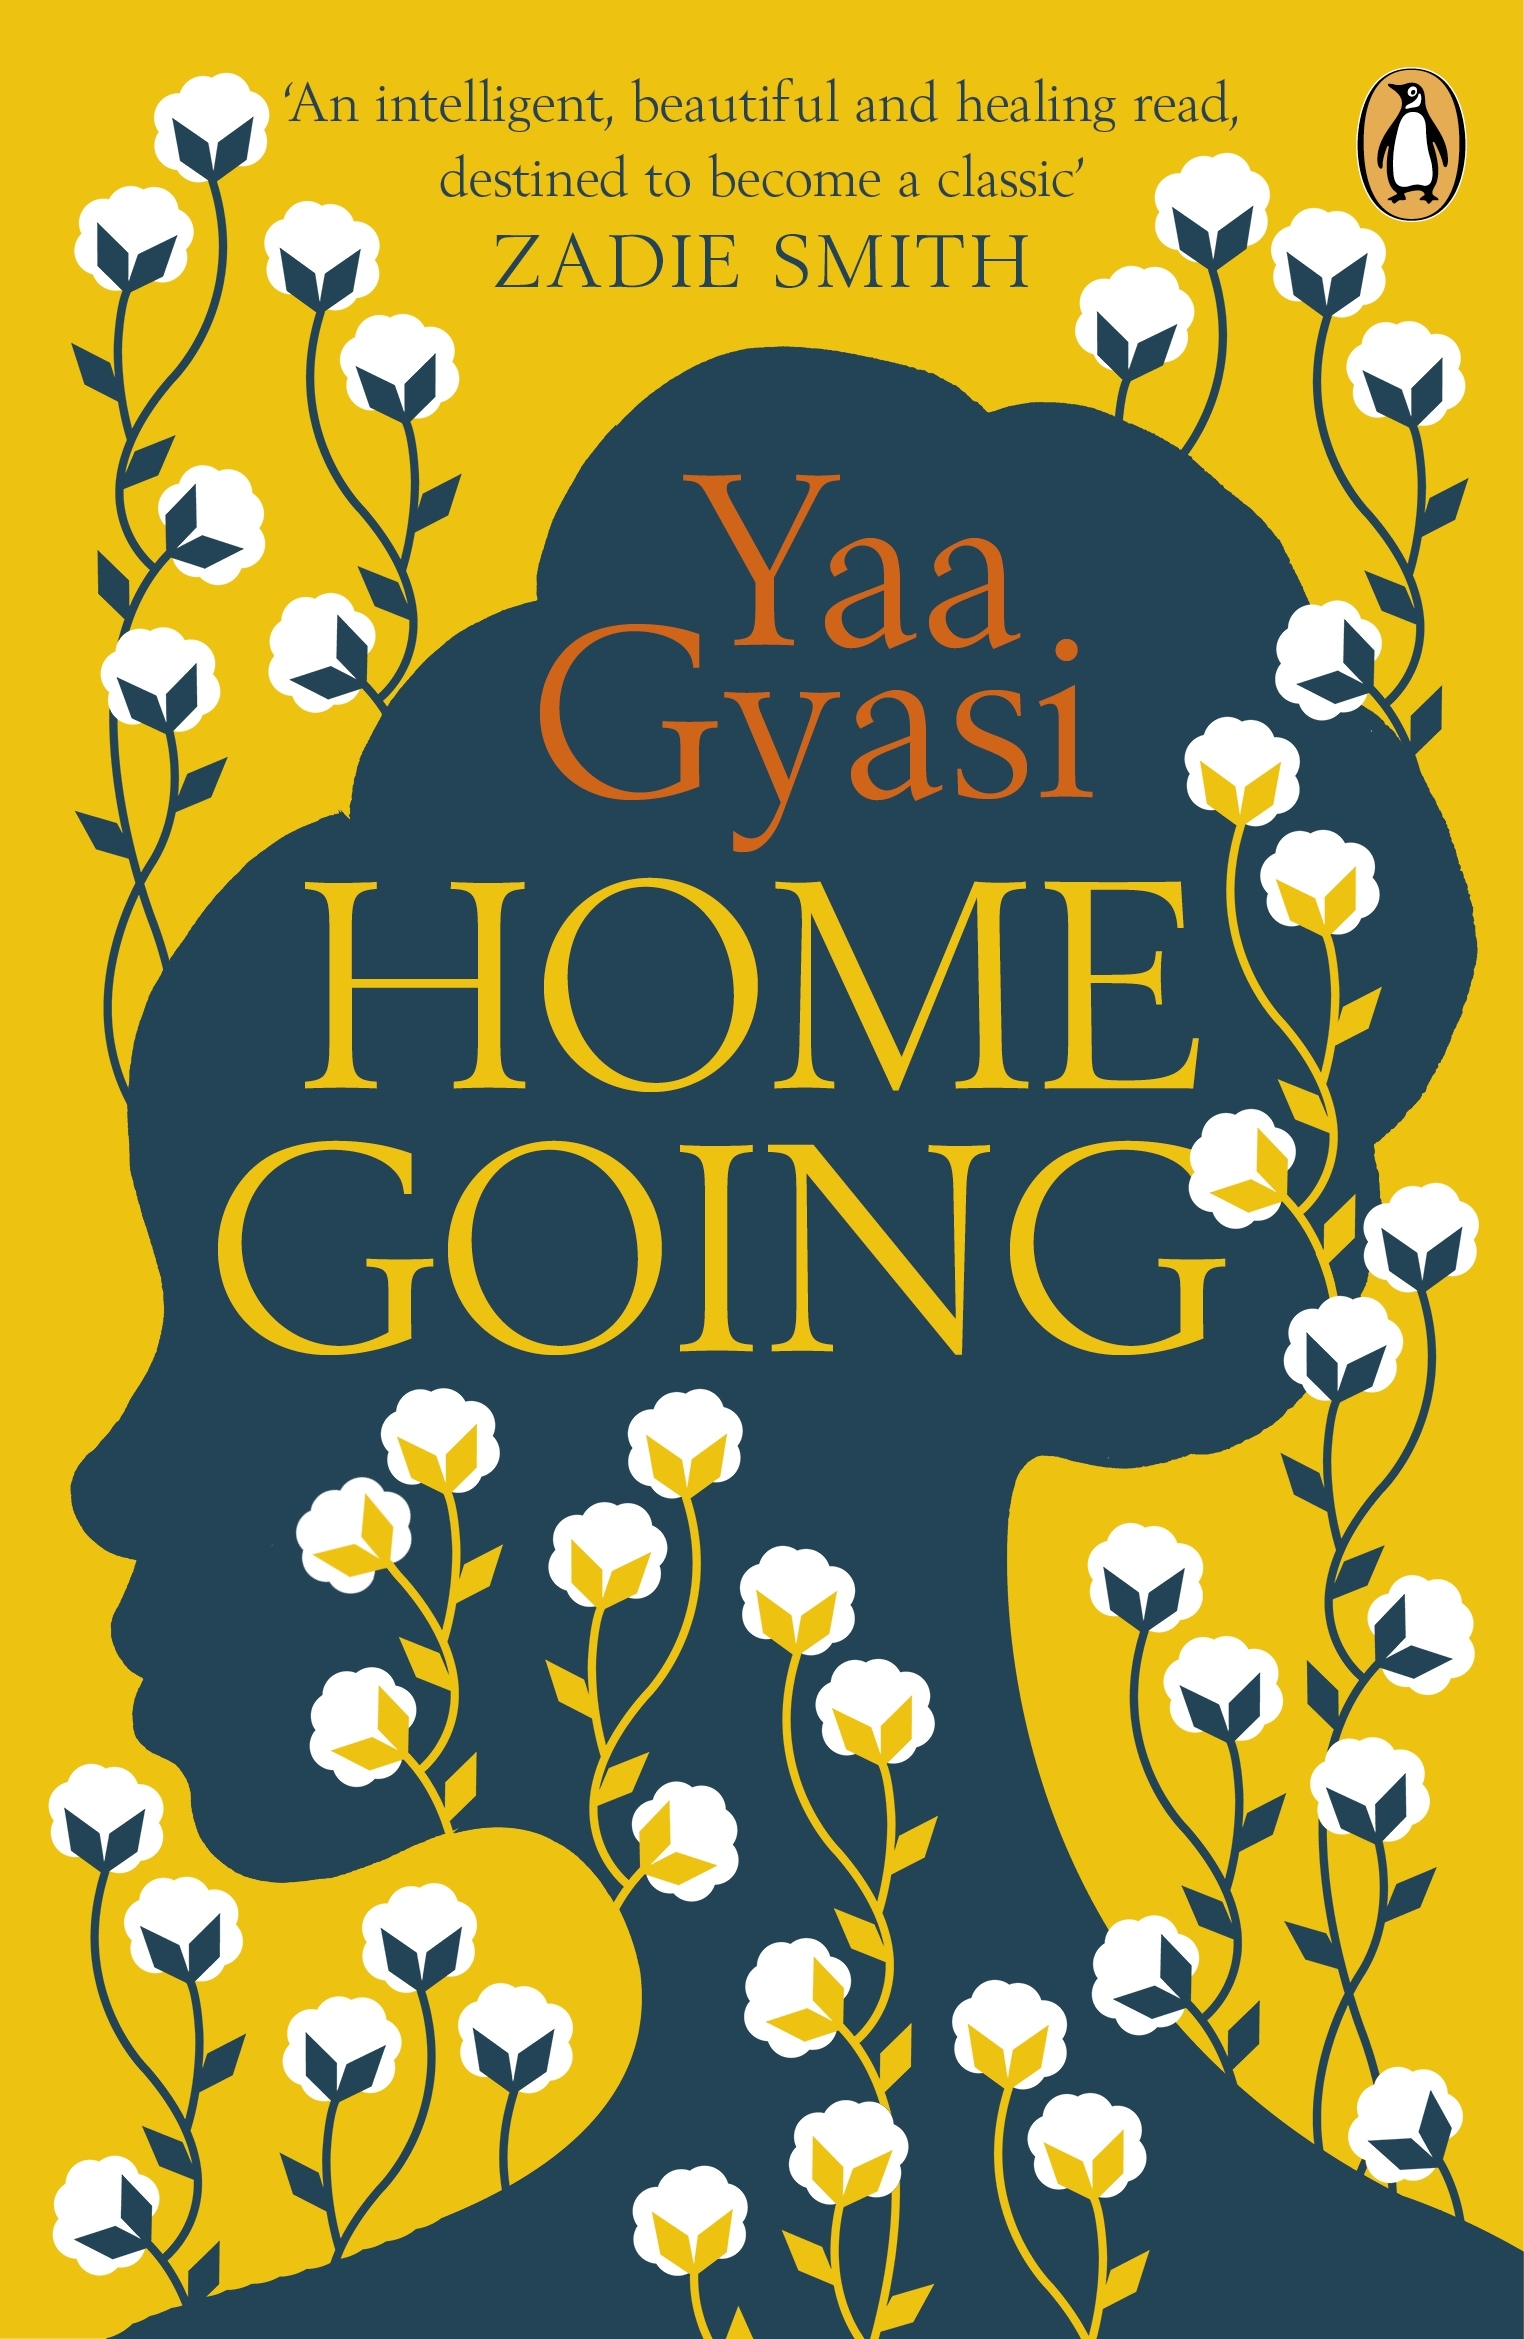 book review of homegoing by yaa gyasi